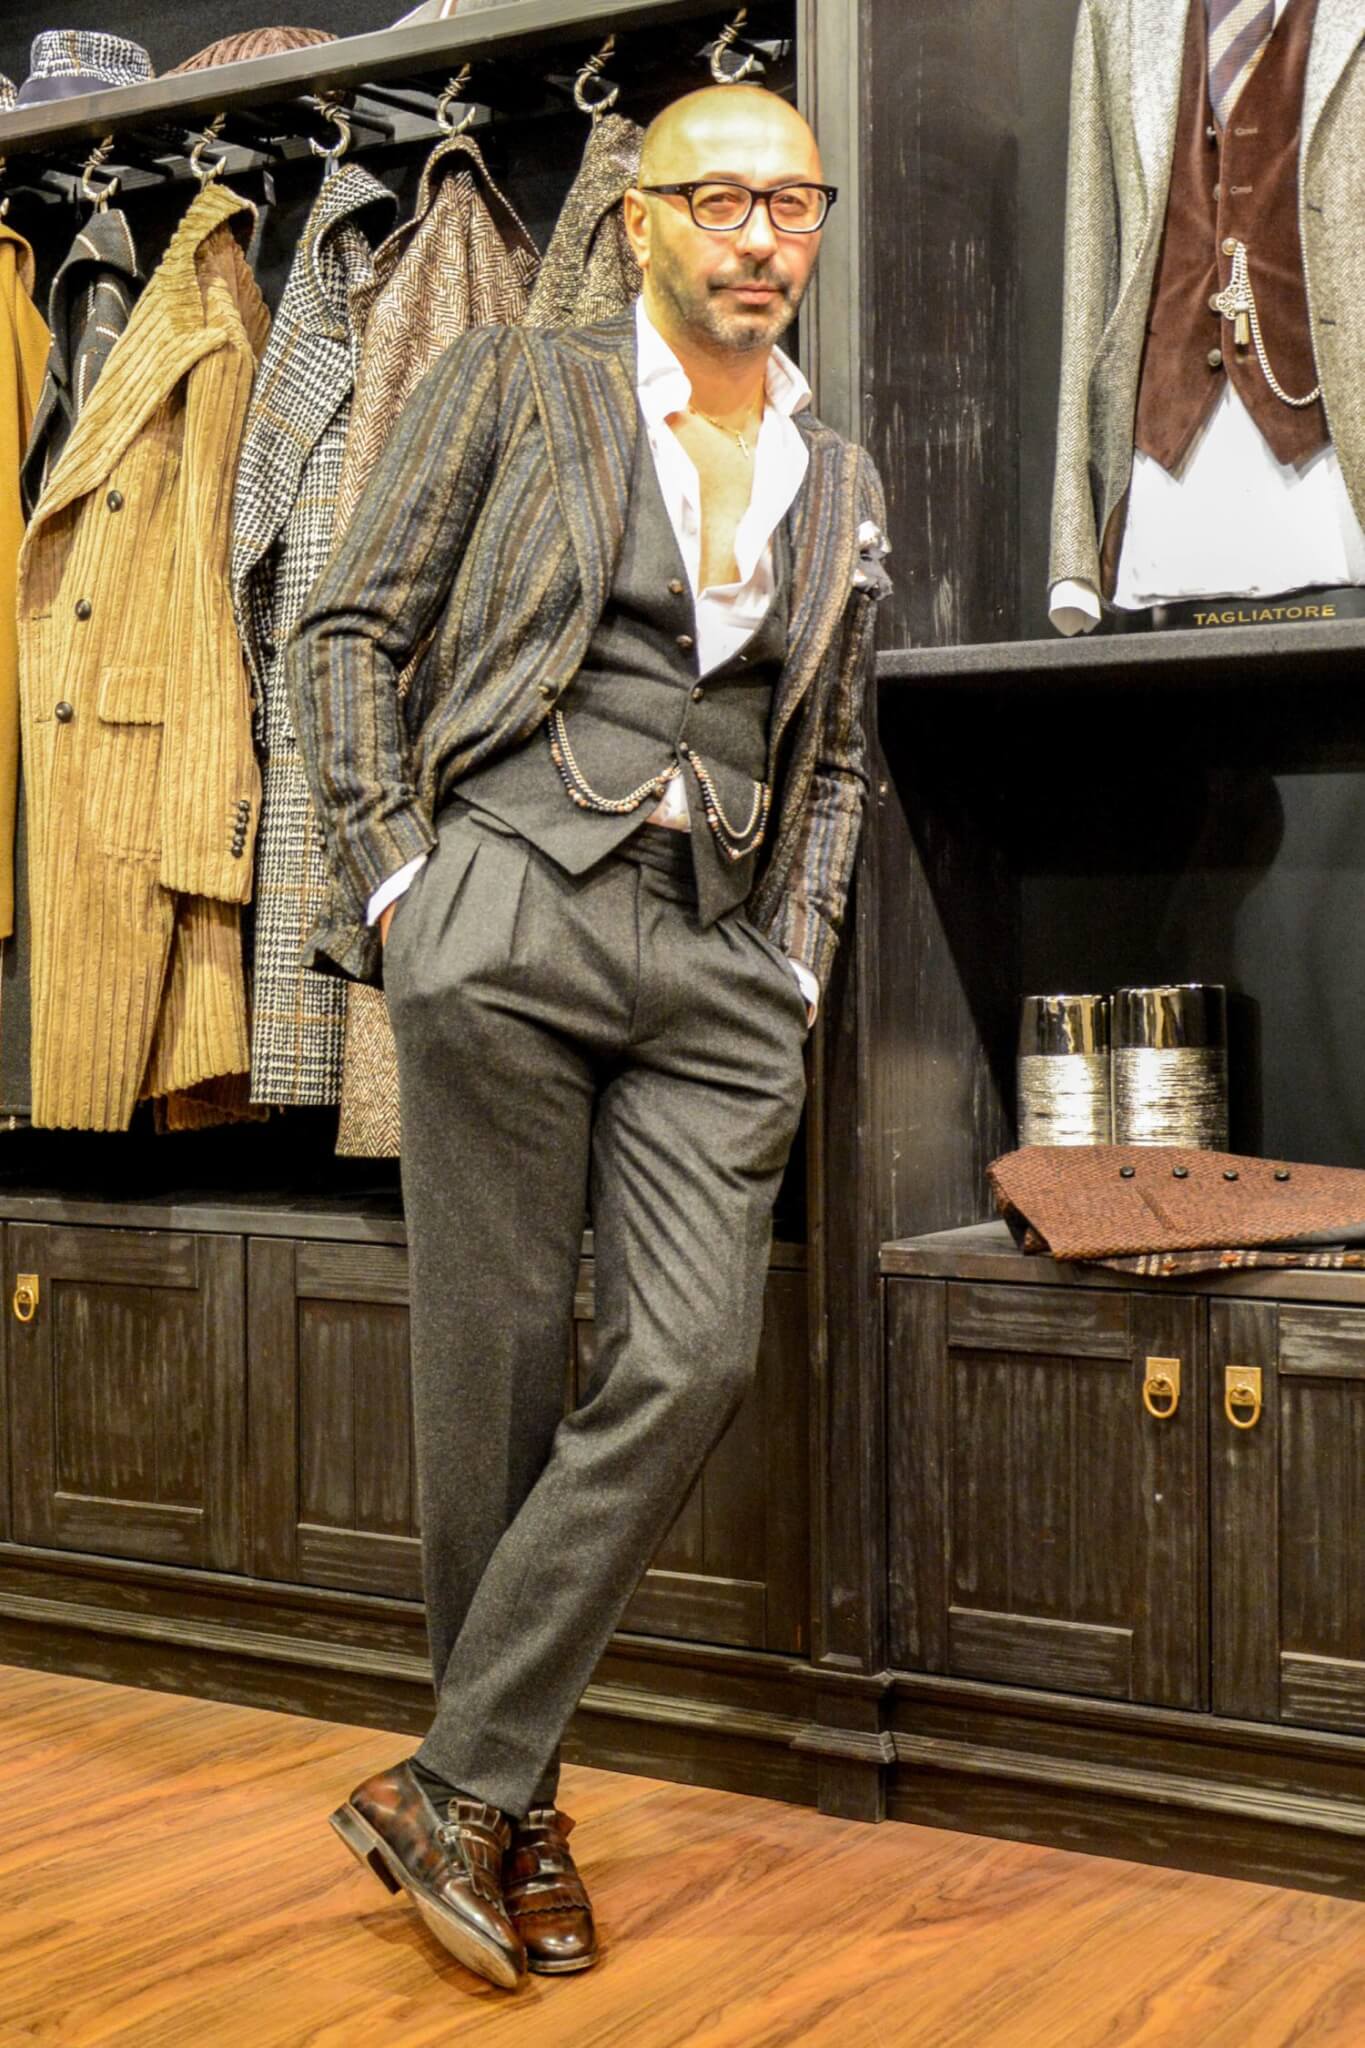 Tweed jackets add a seasonal touch to your men’s wardrobe! Introducing the hottest outfits and